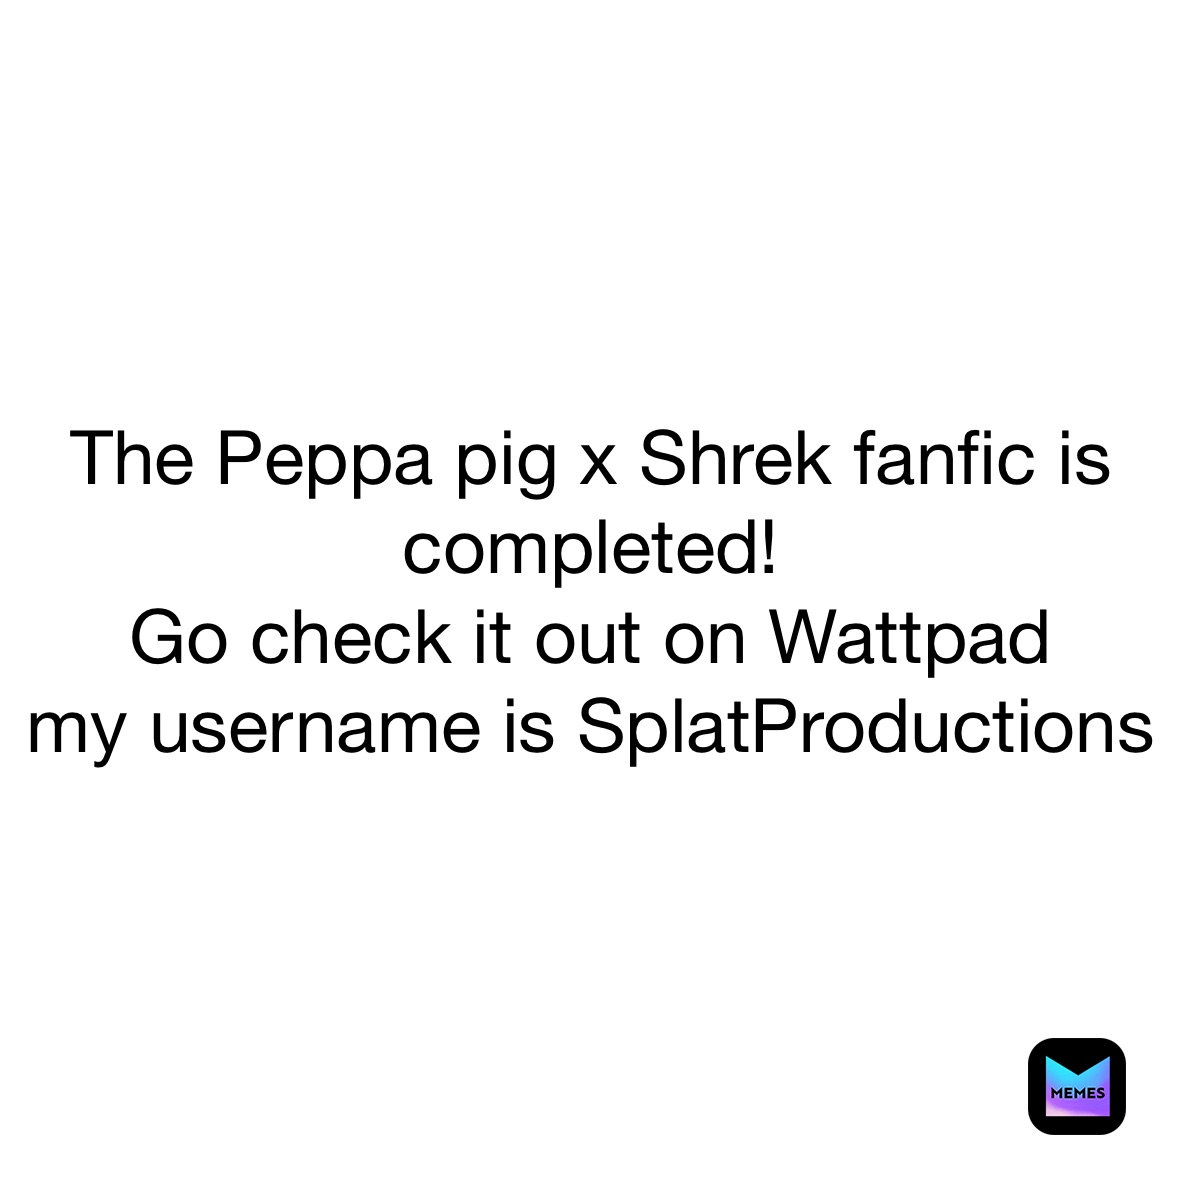 The Peppa pig x Shrek fanfic is completed! 
Go check it out on Wattpad
my username is SplatProductions